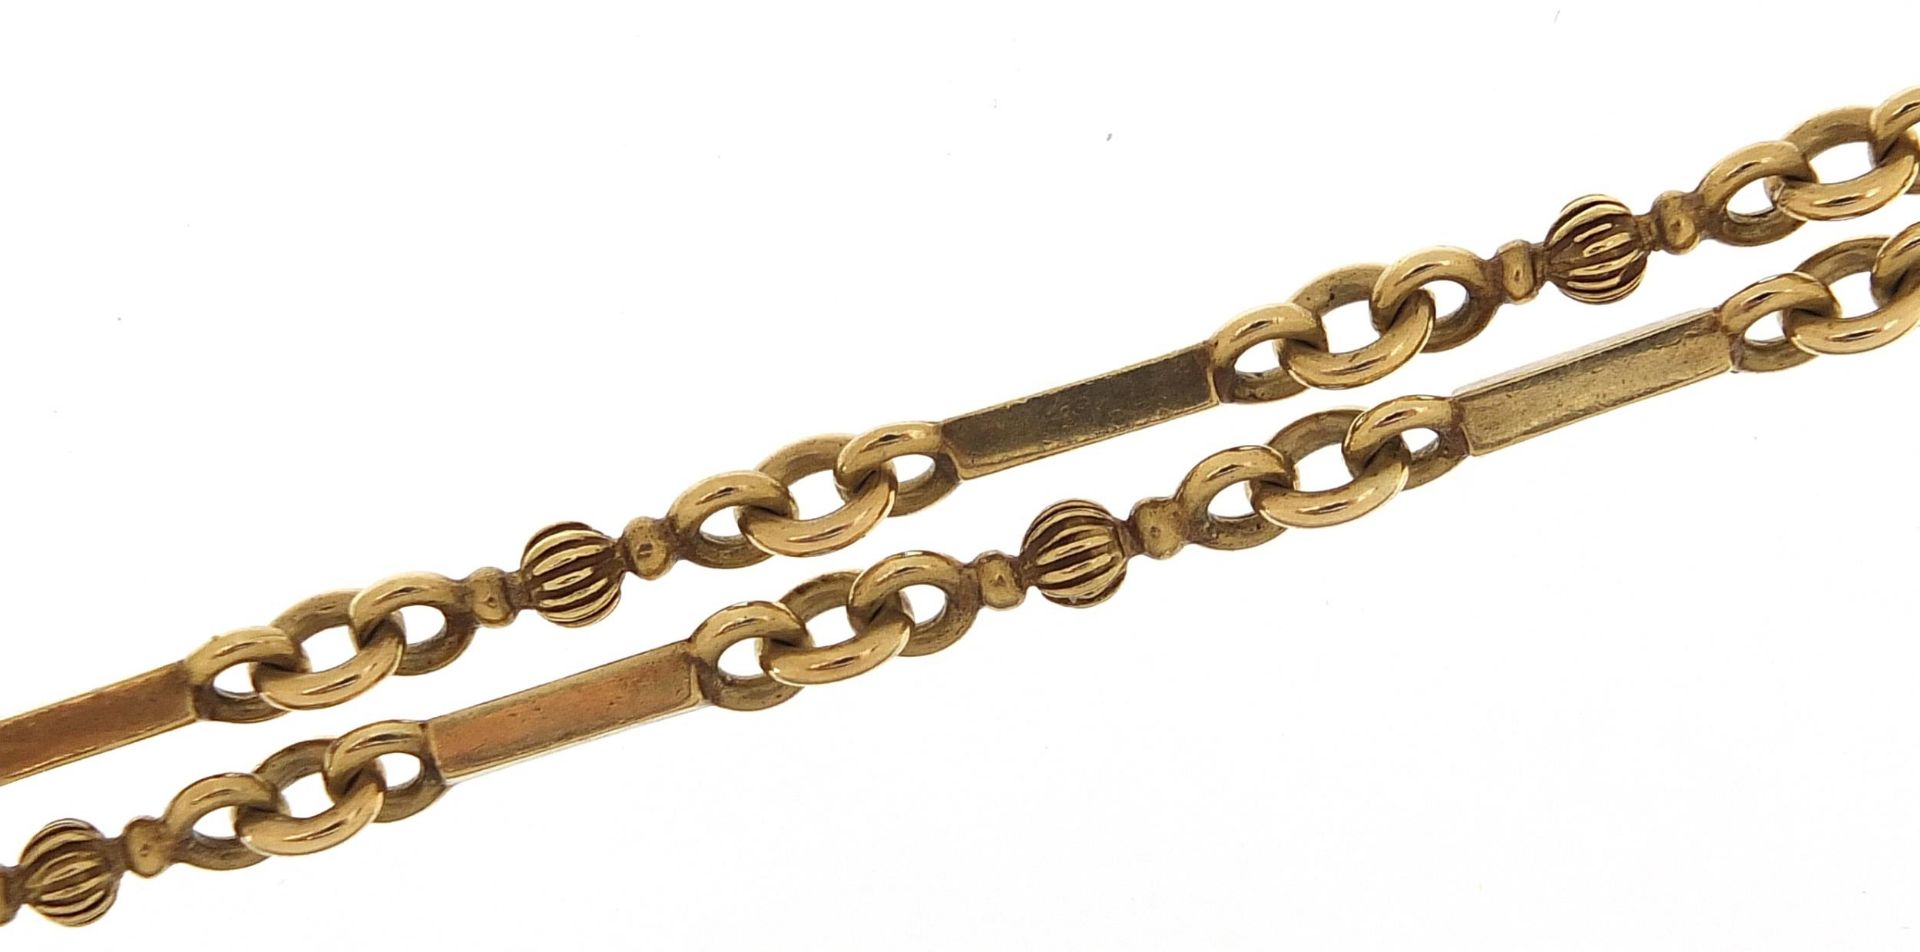 9ct gold fancy link necklace, 62cm in length, 29.6g - this lot is sold without buyer's premium